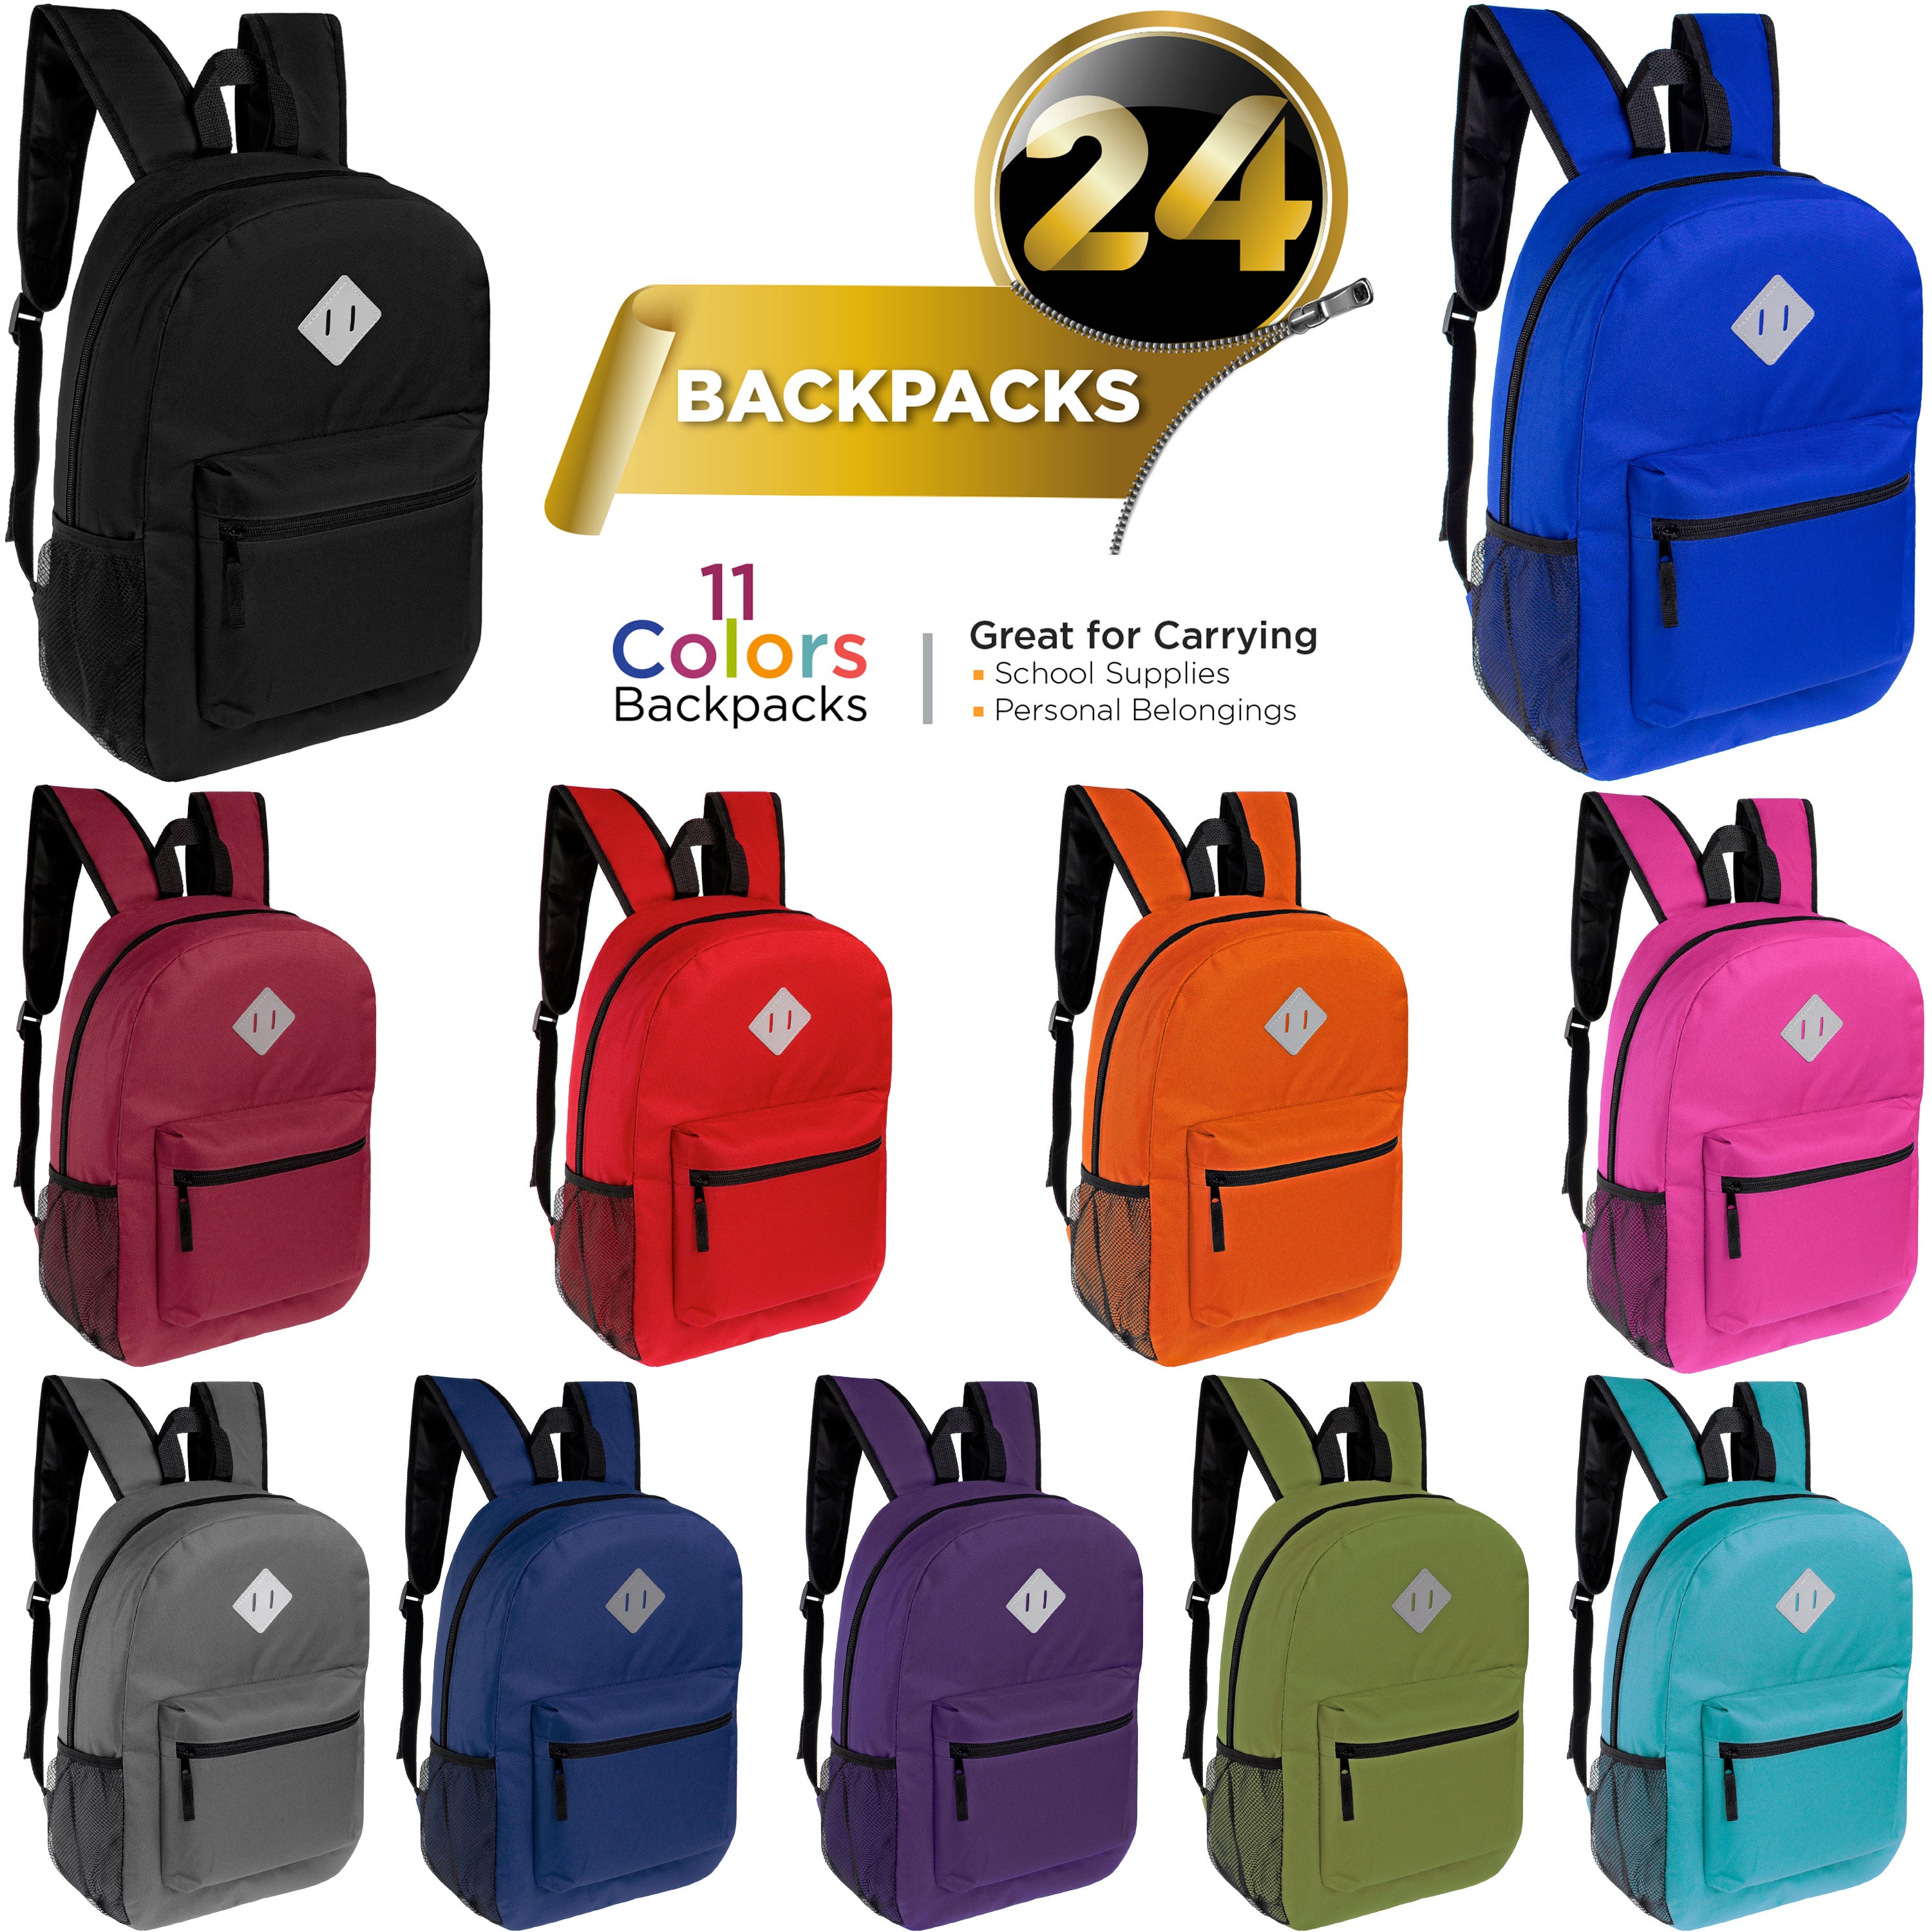 17" Wholesale Diamond Patch Backpack in 11 Assorted Colors - Bulk Case of 24 Bookbags